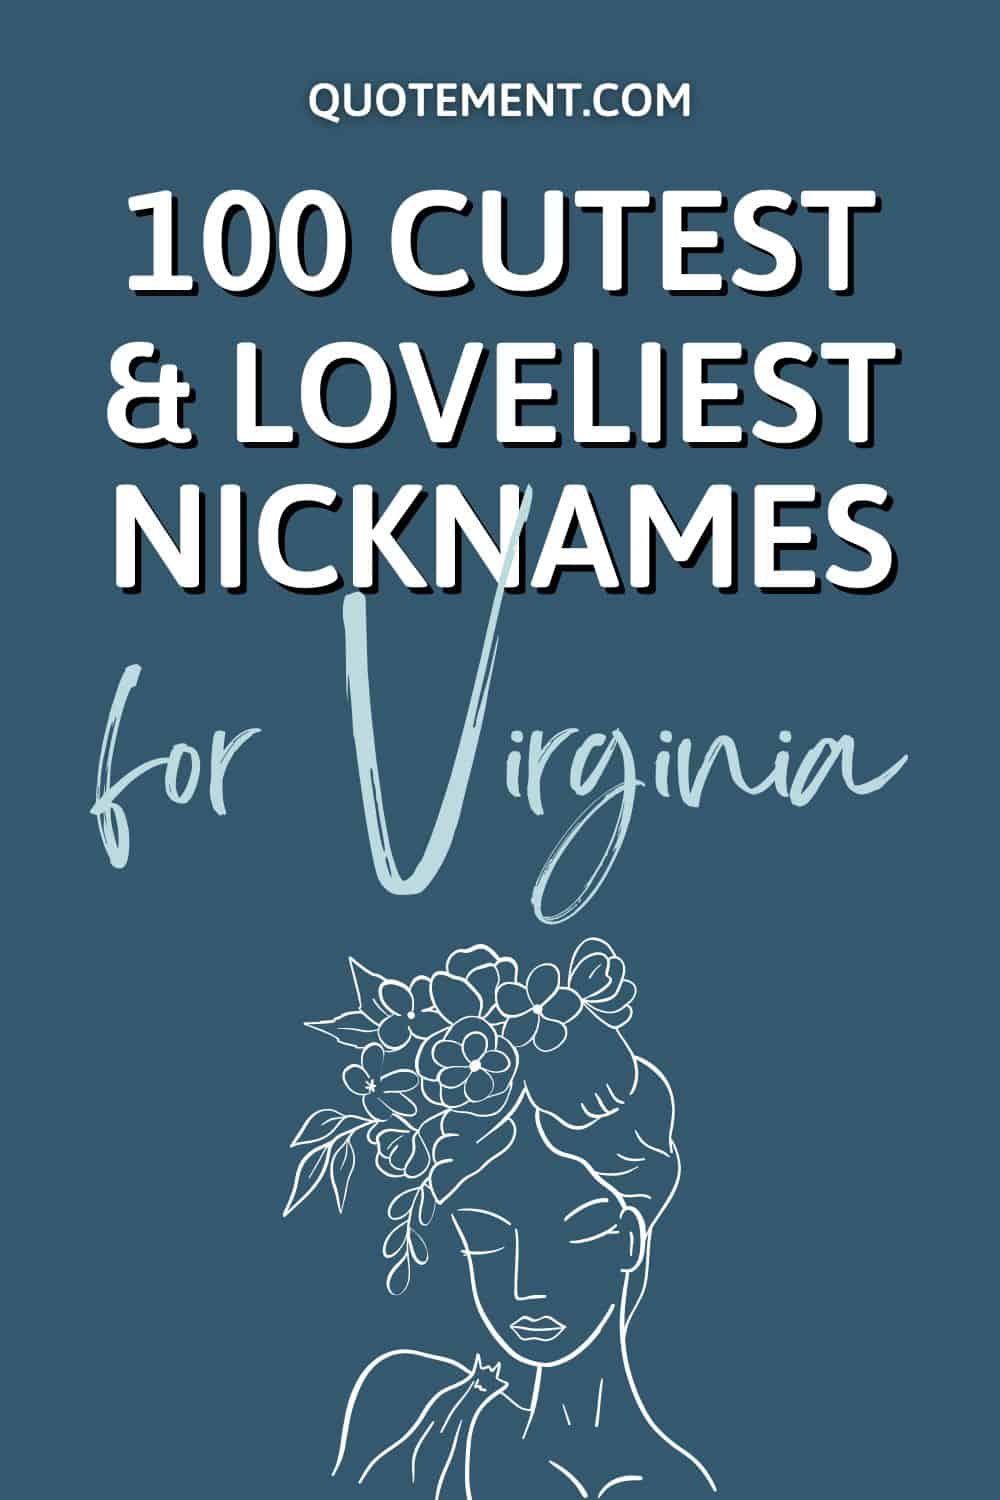 100 Unique, Sweet, And Funny Nicknames For Virginia